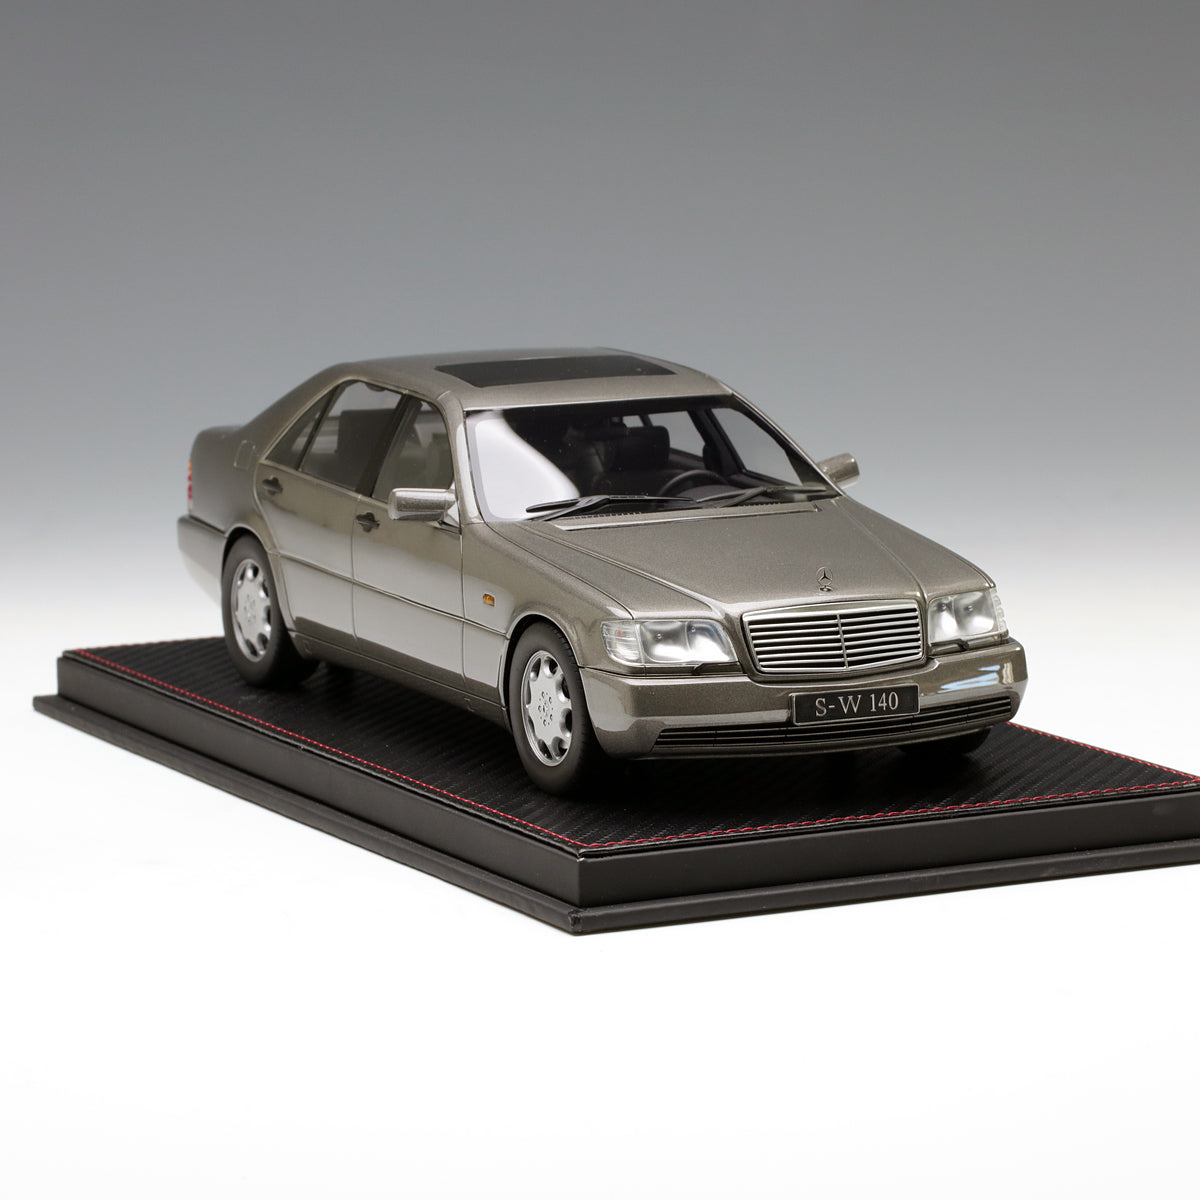 Frontiart AvanStyle 1:18 Mercedes Benz S600 W140 Limousine 1997 Iron Gray AS007-14